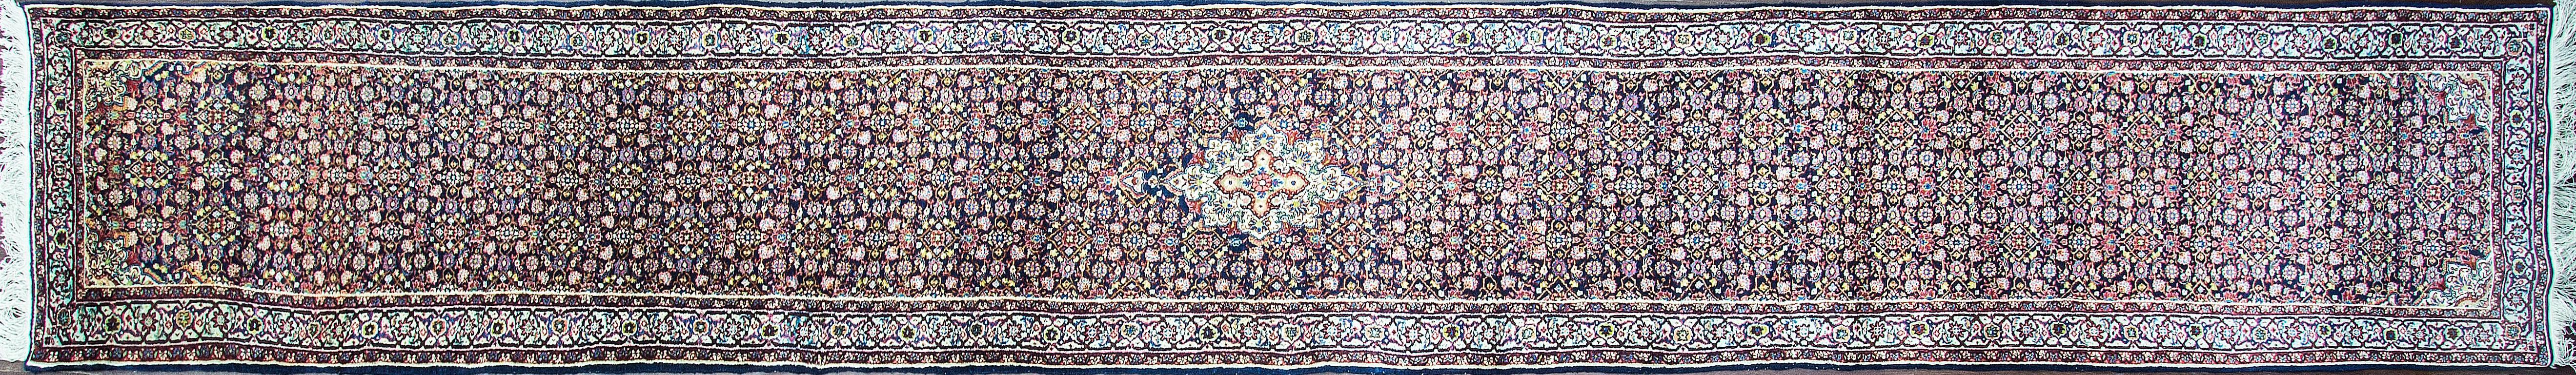 Vegetable dyed wool Persian Tabriz carpet.
Great combination of color and design.
The city of Tabriz is situated in North West Persia and it is one of the largest cities and also the capital in the province of Azerbaijan and was the earliest